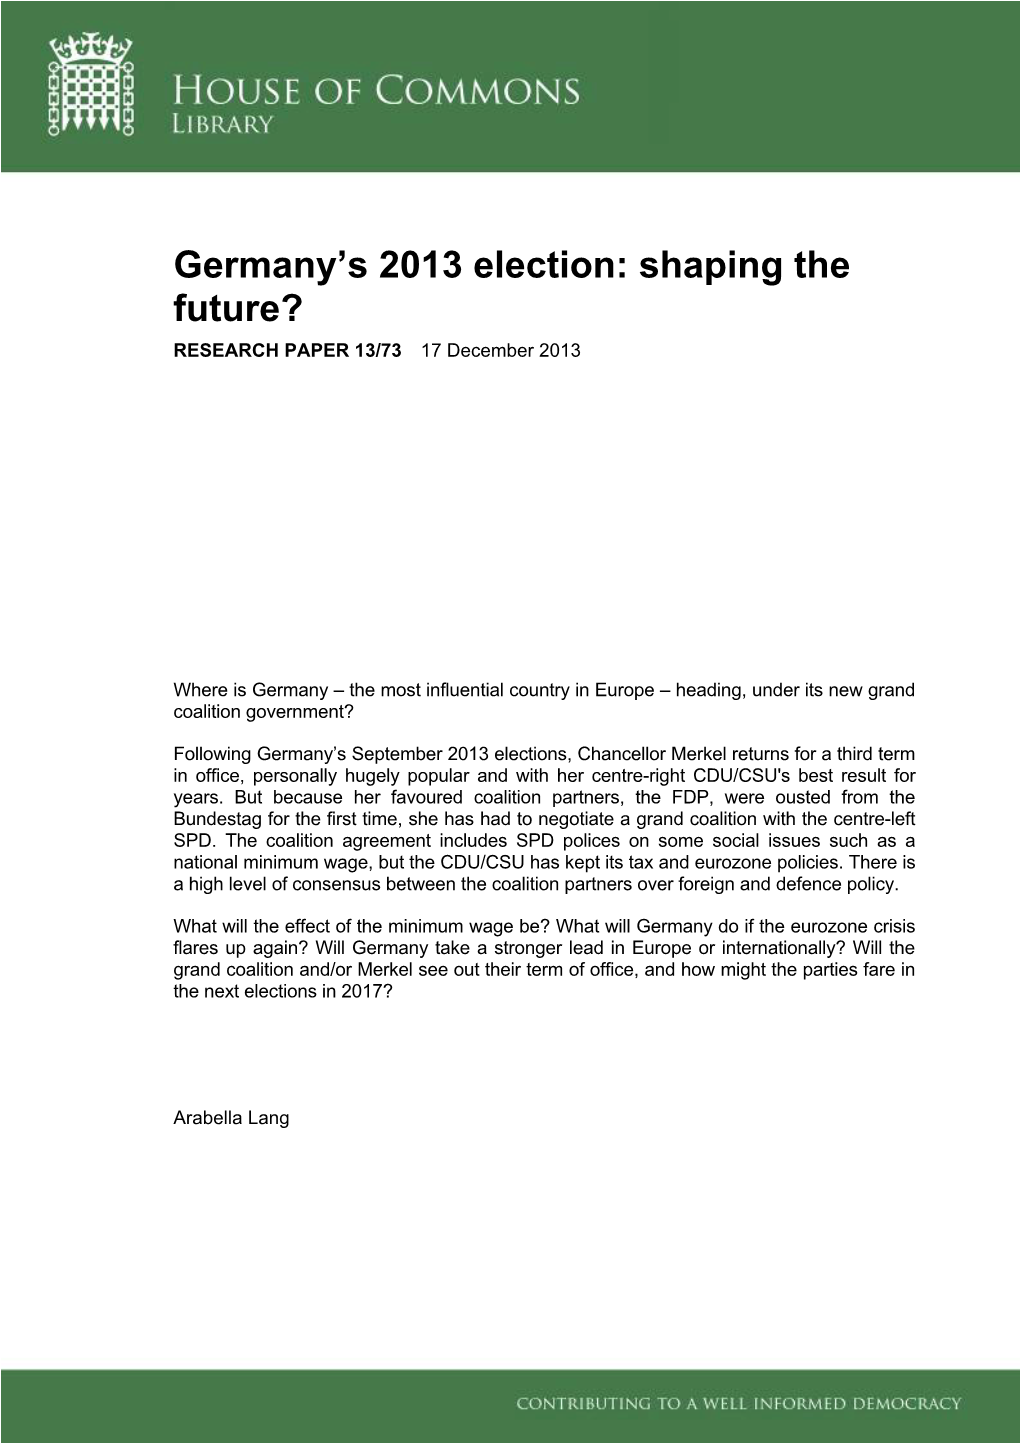 Germany's 2013 Election: Shaping the Future?